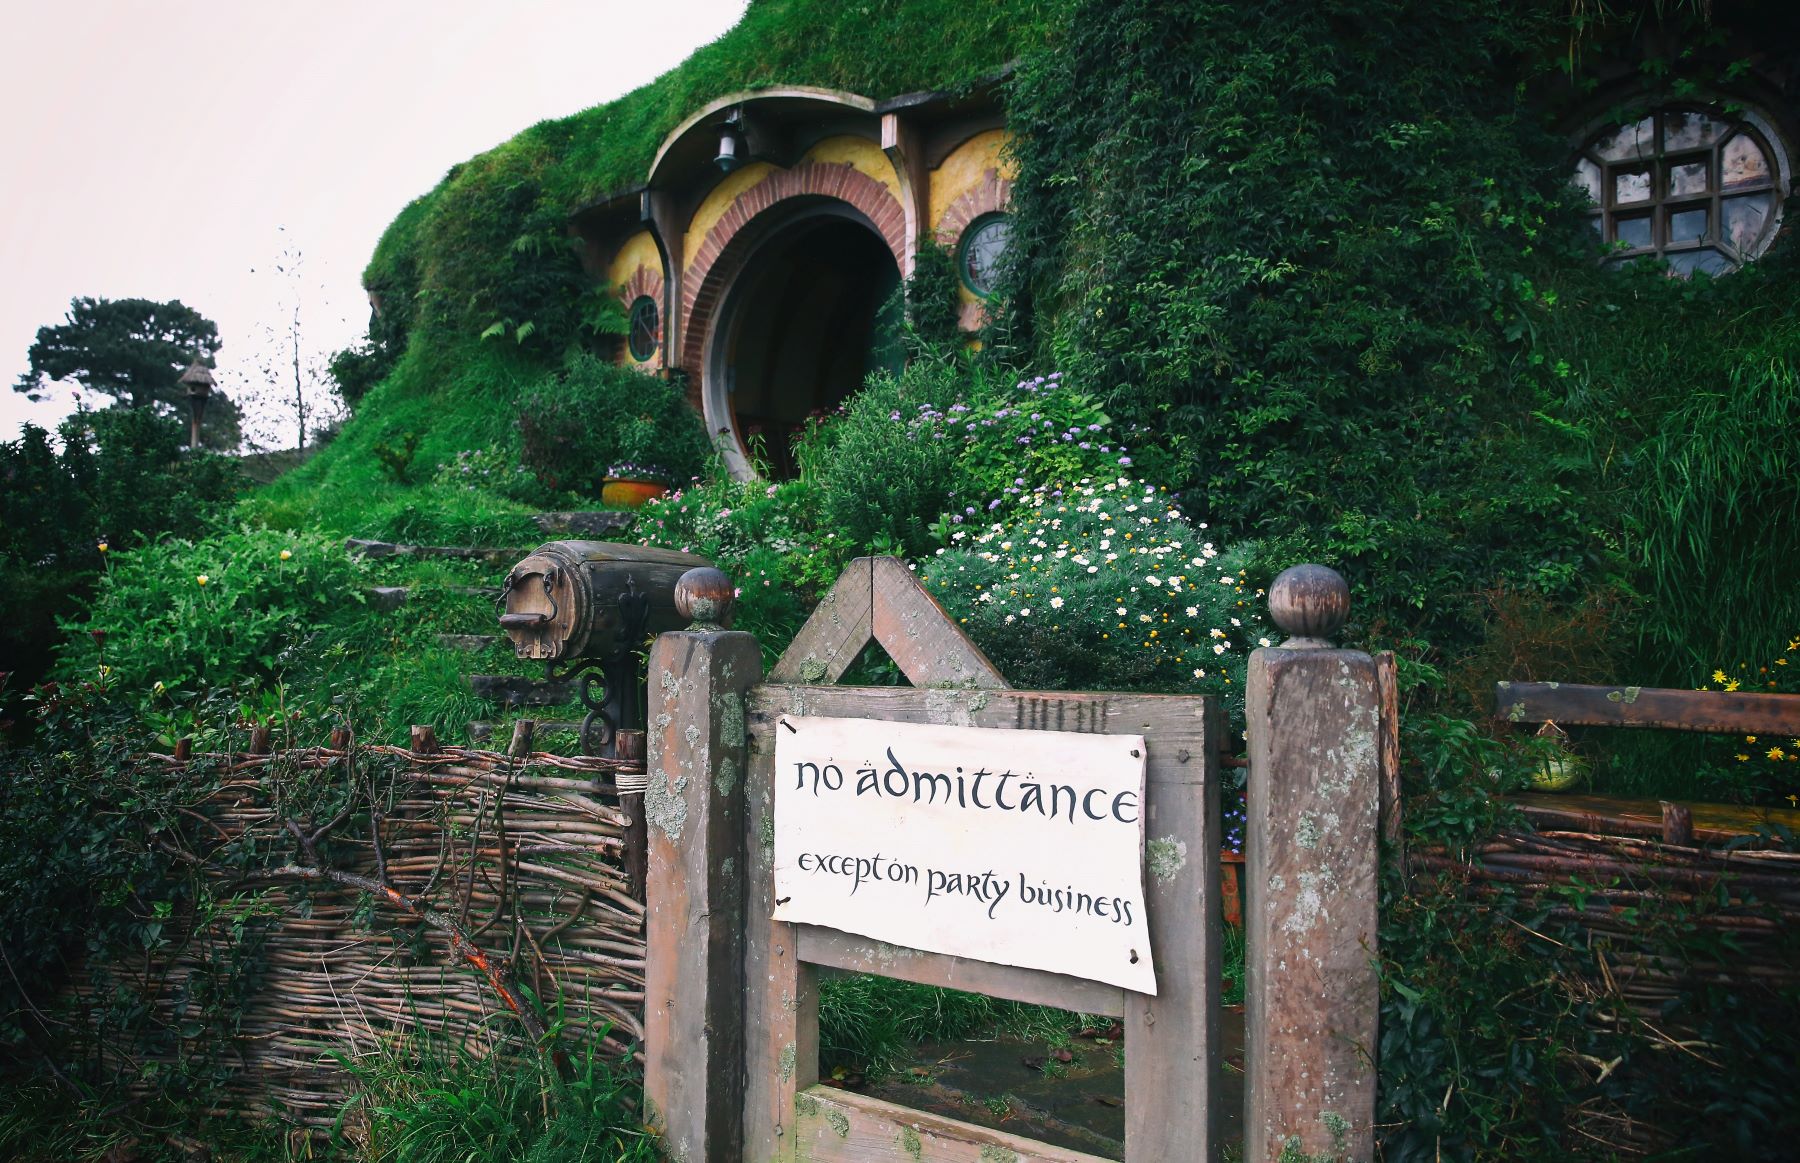 Bilbo Baggins' house from the Hobbiton movie set from 'The Lord of the Rings' and 'The Hobbit' movie trilogies